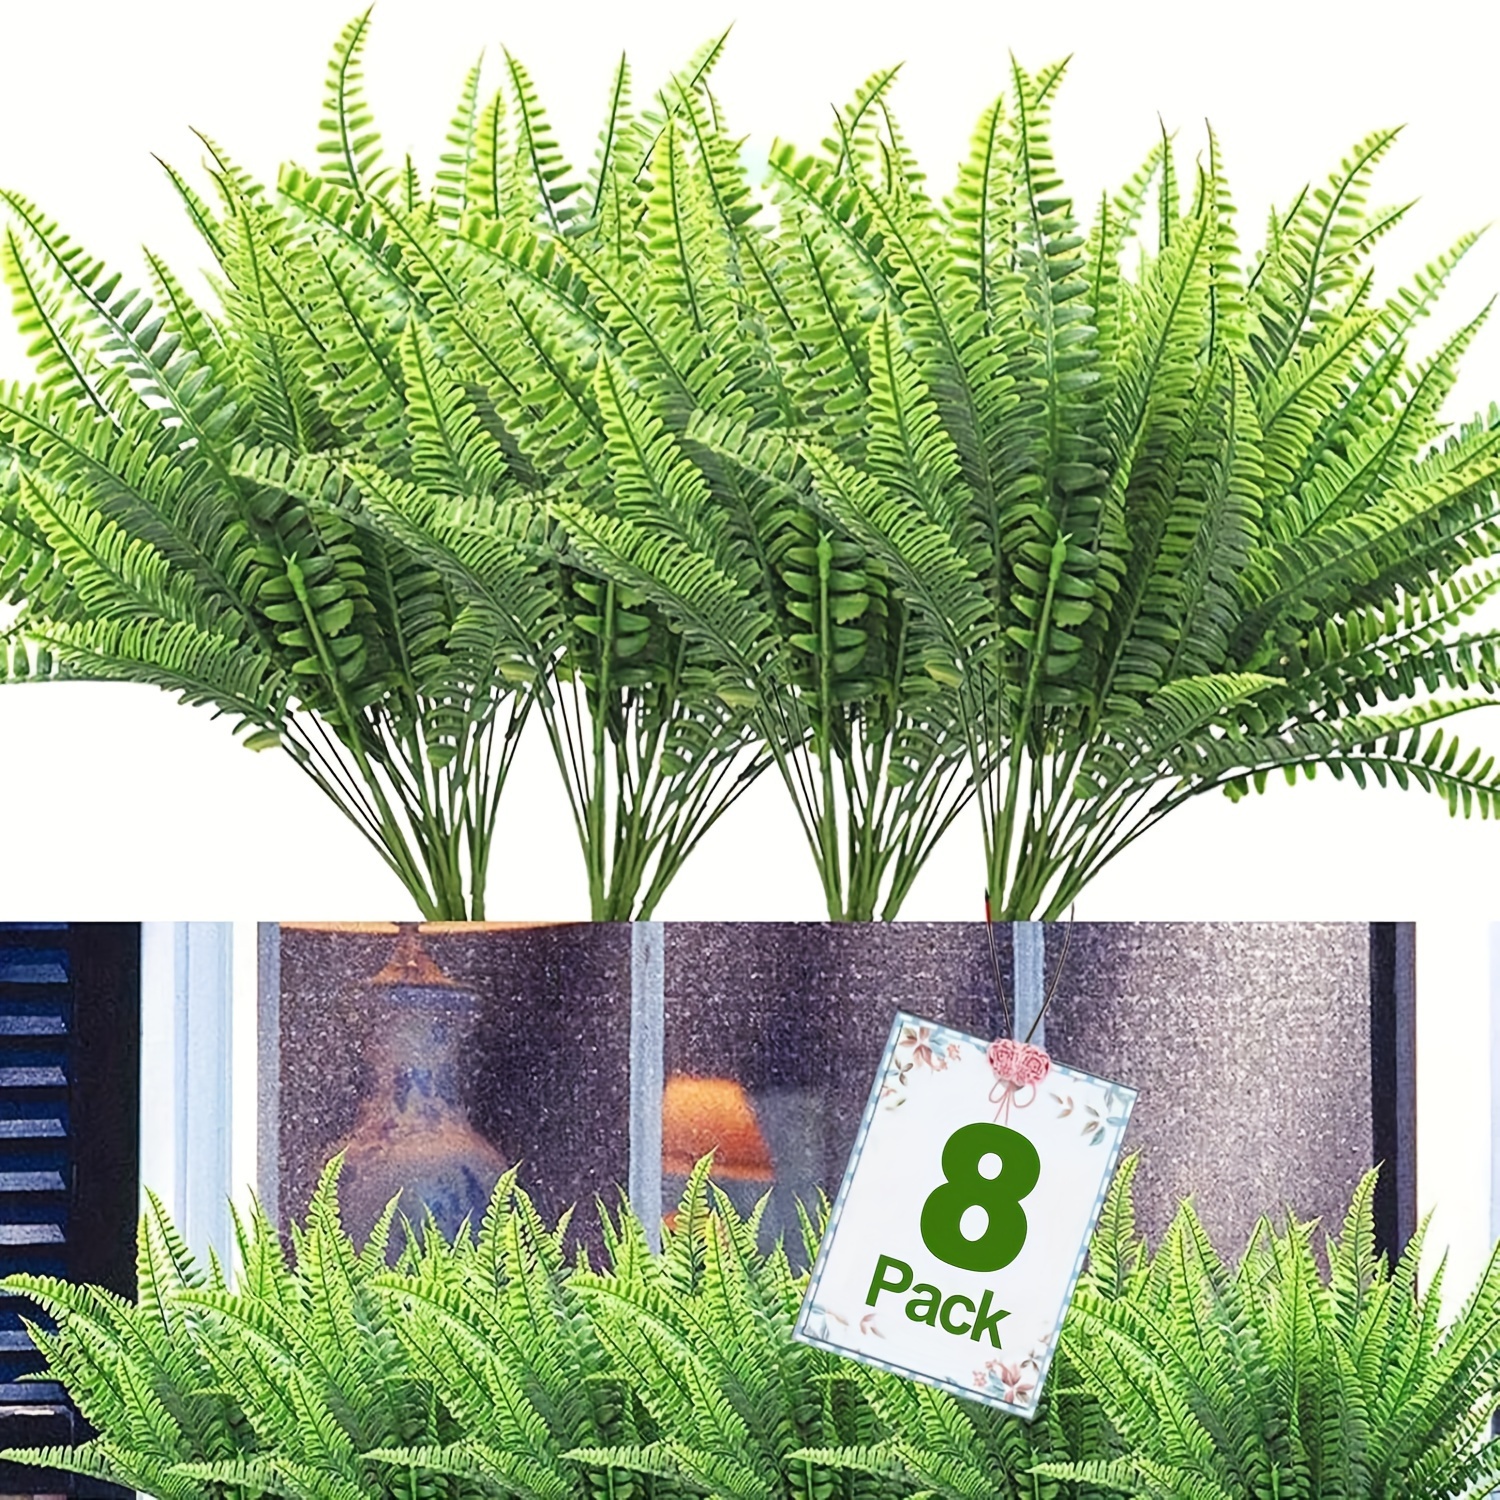 

8-pack Uv Resistant Artificial Boston Ferns - Plastic Faux Greenery Shrubs, Freestanding For Indoor/outdoor Decor, Ideal For Christmas, Thanksgiving, Valentine's, Father's & Mother's Day